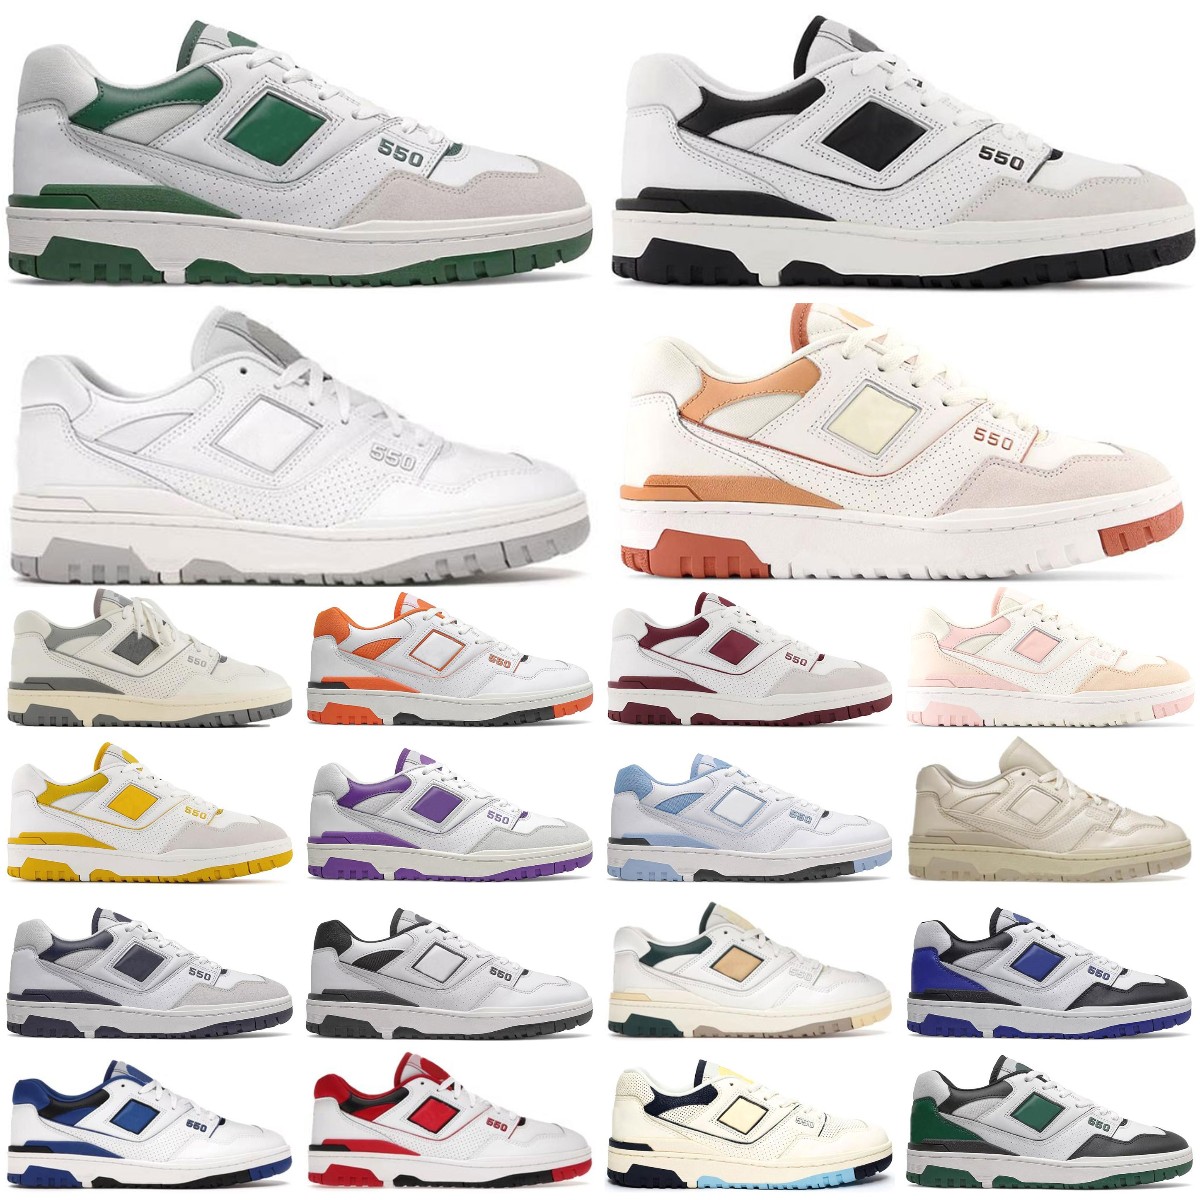 

NEW 550 550S casual shoes Cream Navy Blue White Green Shadow Sea Salt Varsity Gold UNC Syracuse Men Women N550 b550 BB550 outdoor Sports Trainers Sneakers, Box